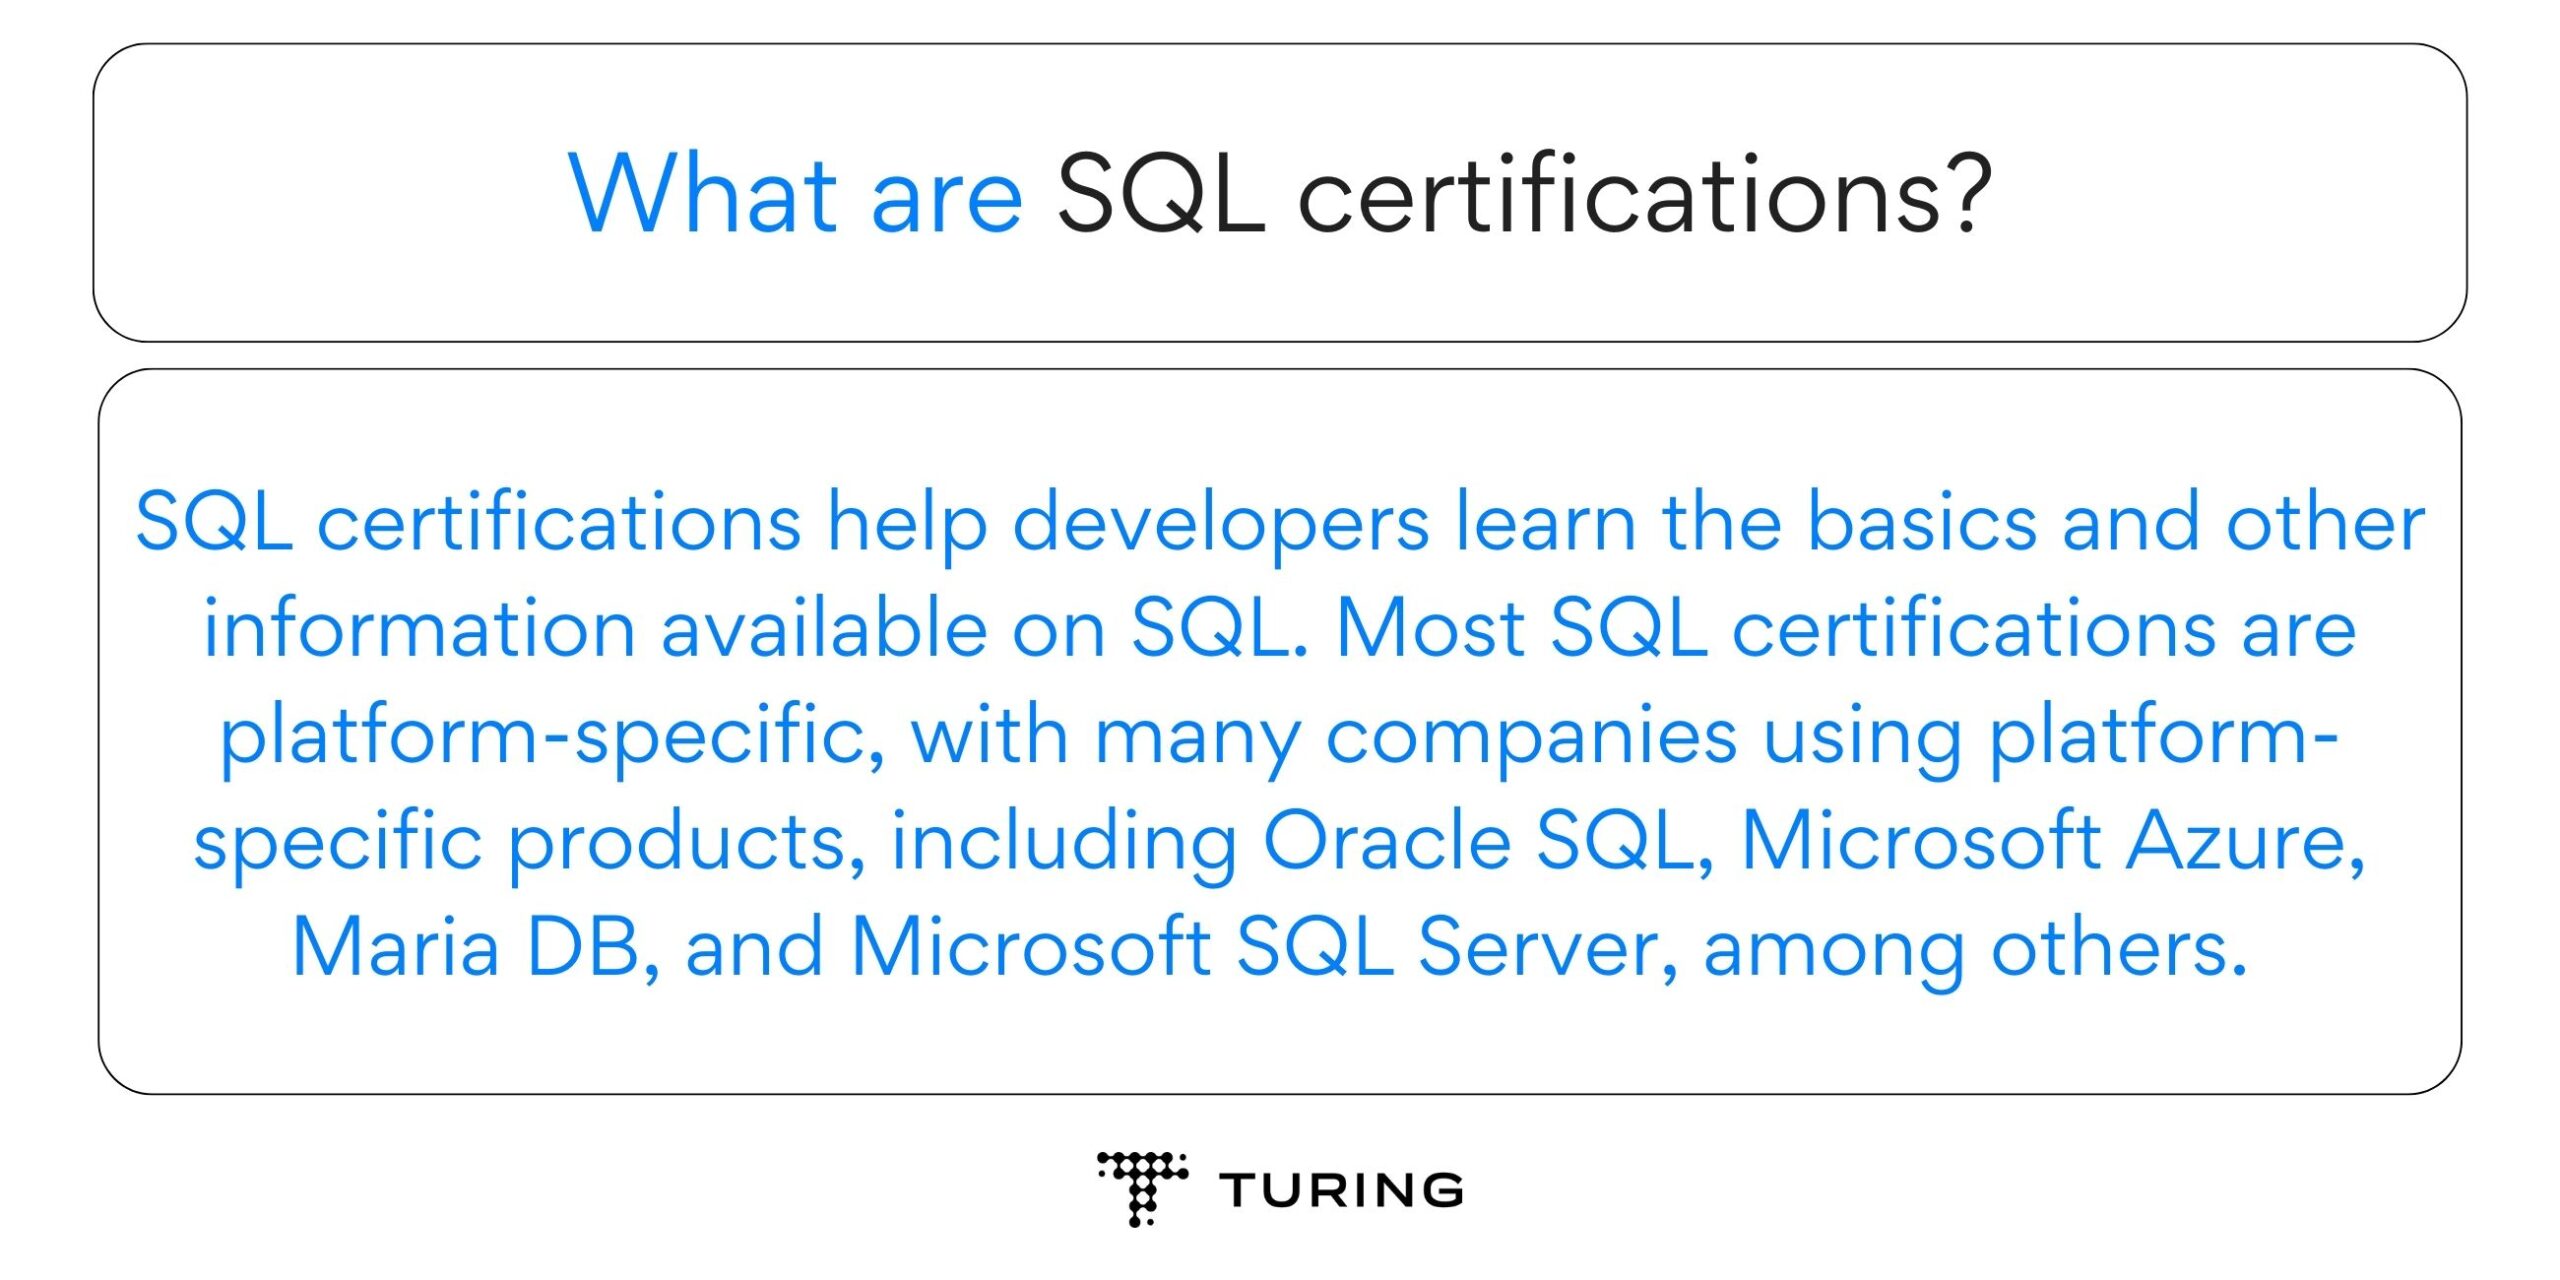 What are SQL certifications